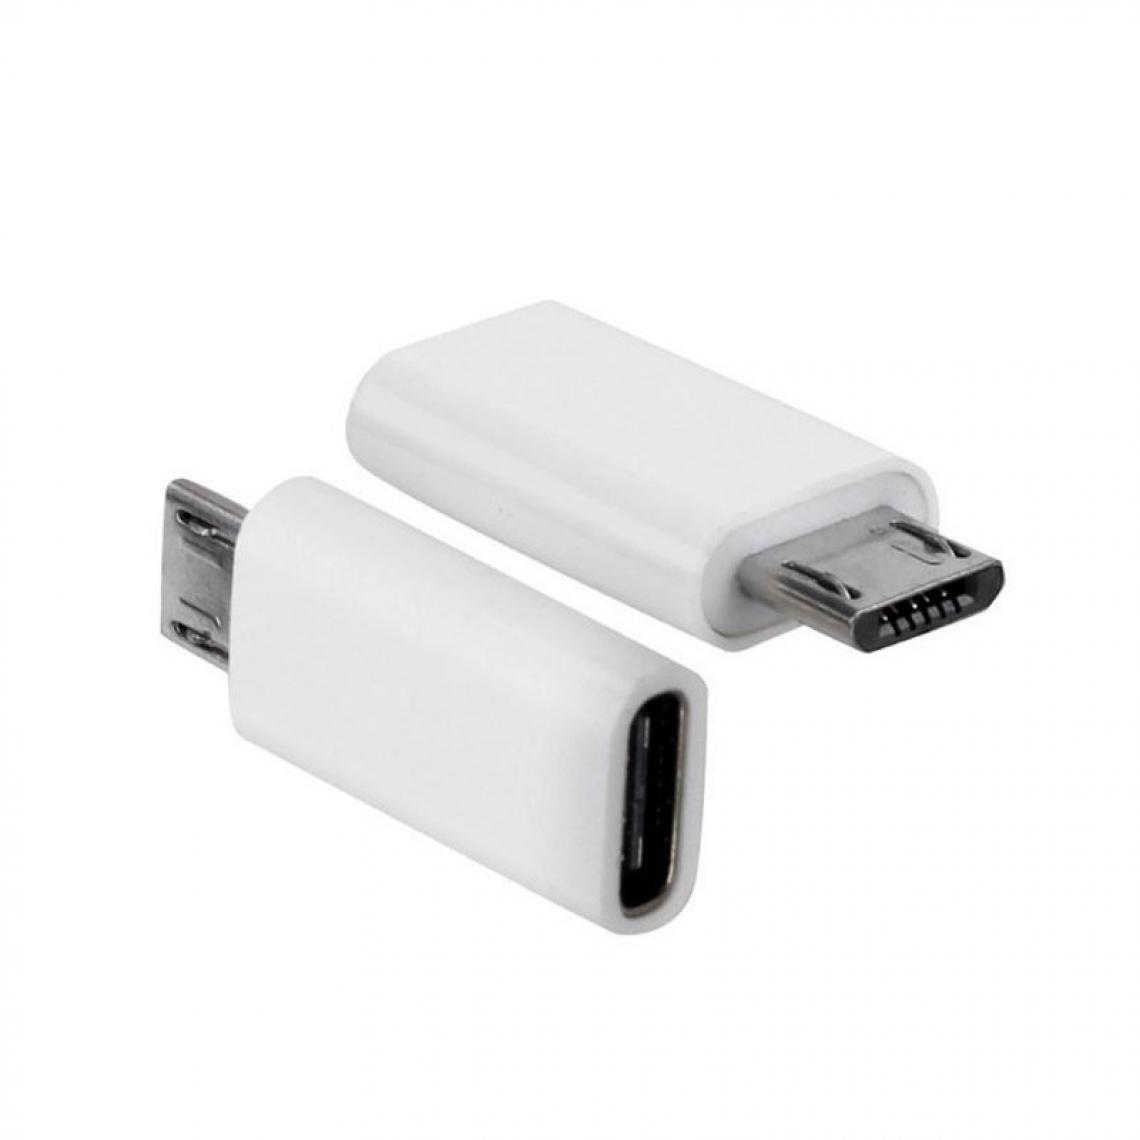 Phonecare - Adaptateur Data Transfer + Chargeur - Type C To Micro Usb - Autres accessoires smartphone